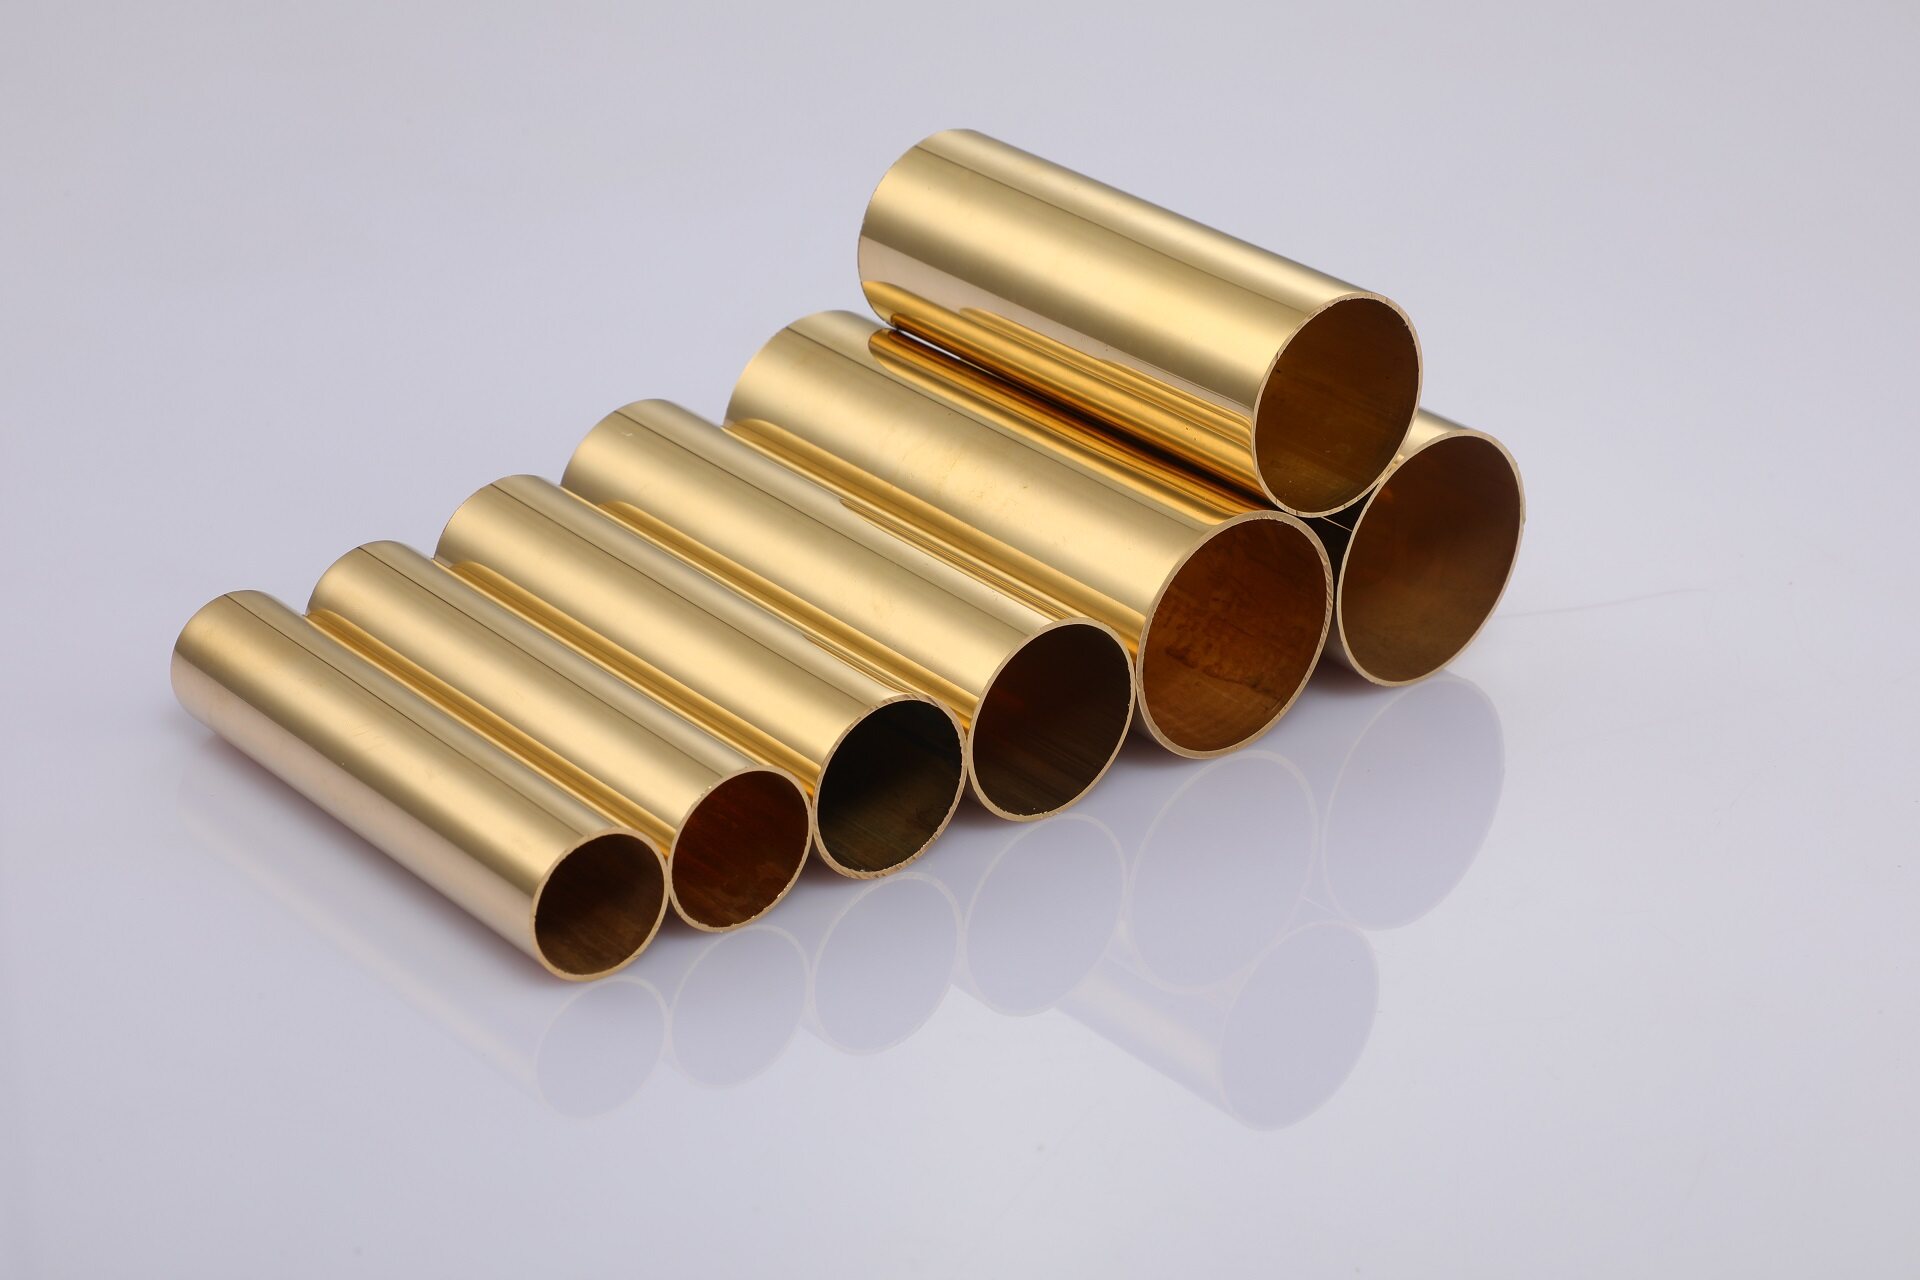 Lead-Free Brass Ingot Supplier: A Sustainable Solution for a Greener Future